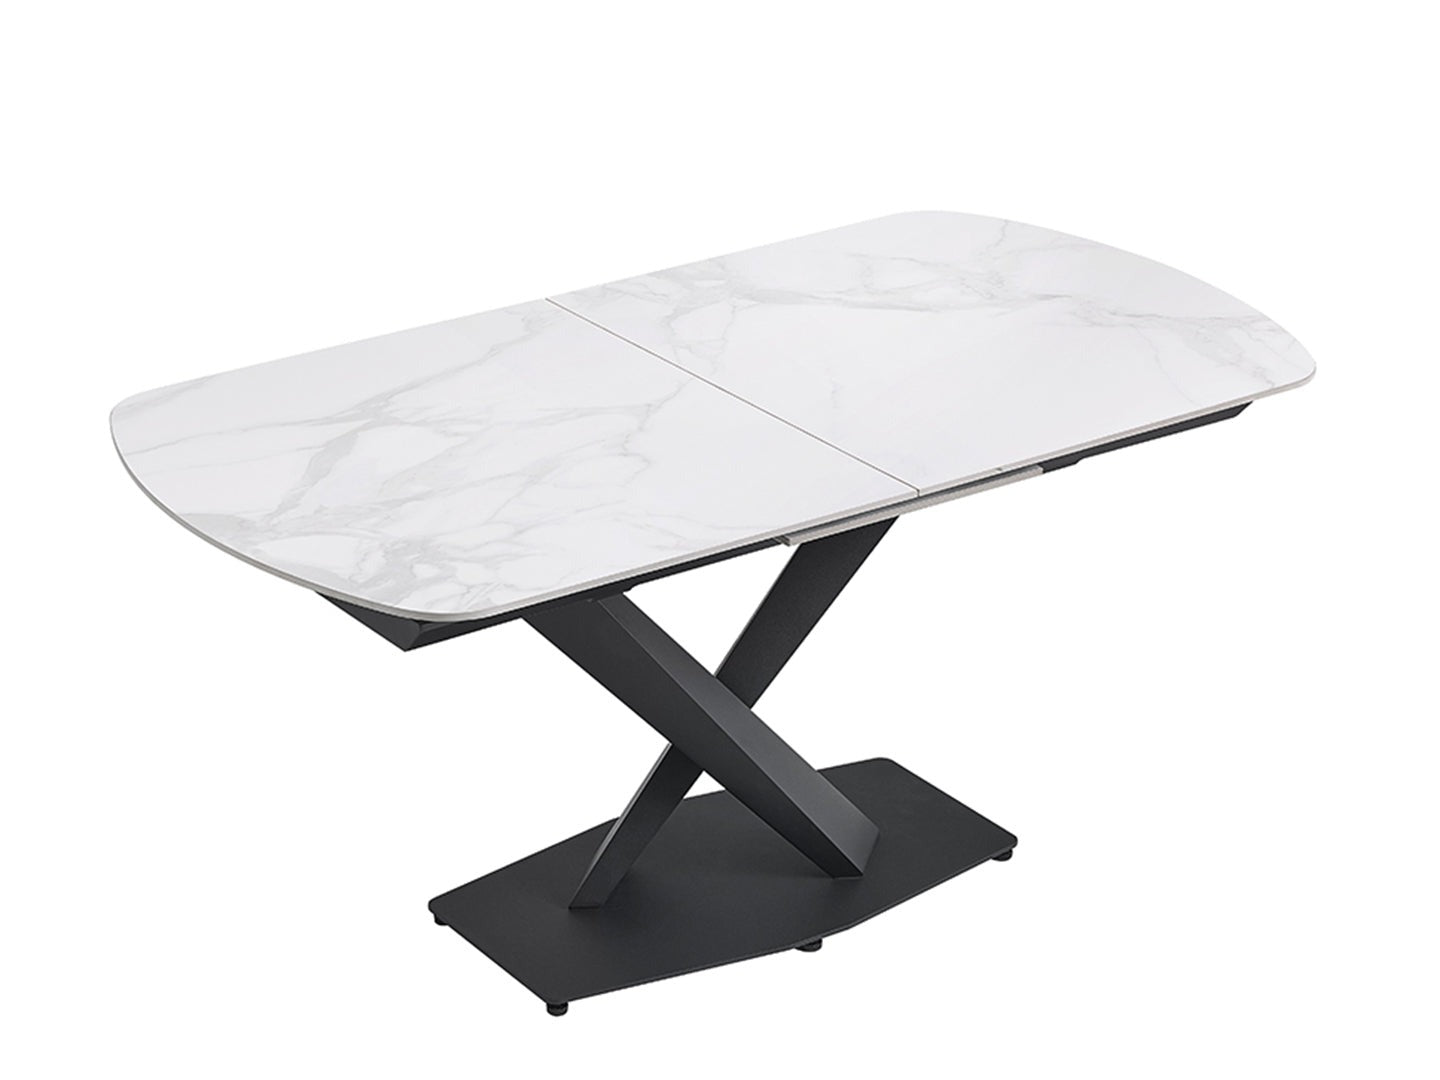 MARBLE EXTENDABLE DINING TABLE BLACK STAINLESS STEEL BASE - Lux Furniture